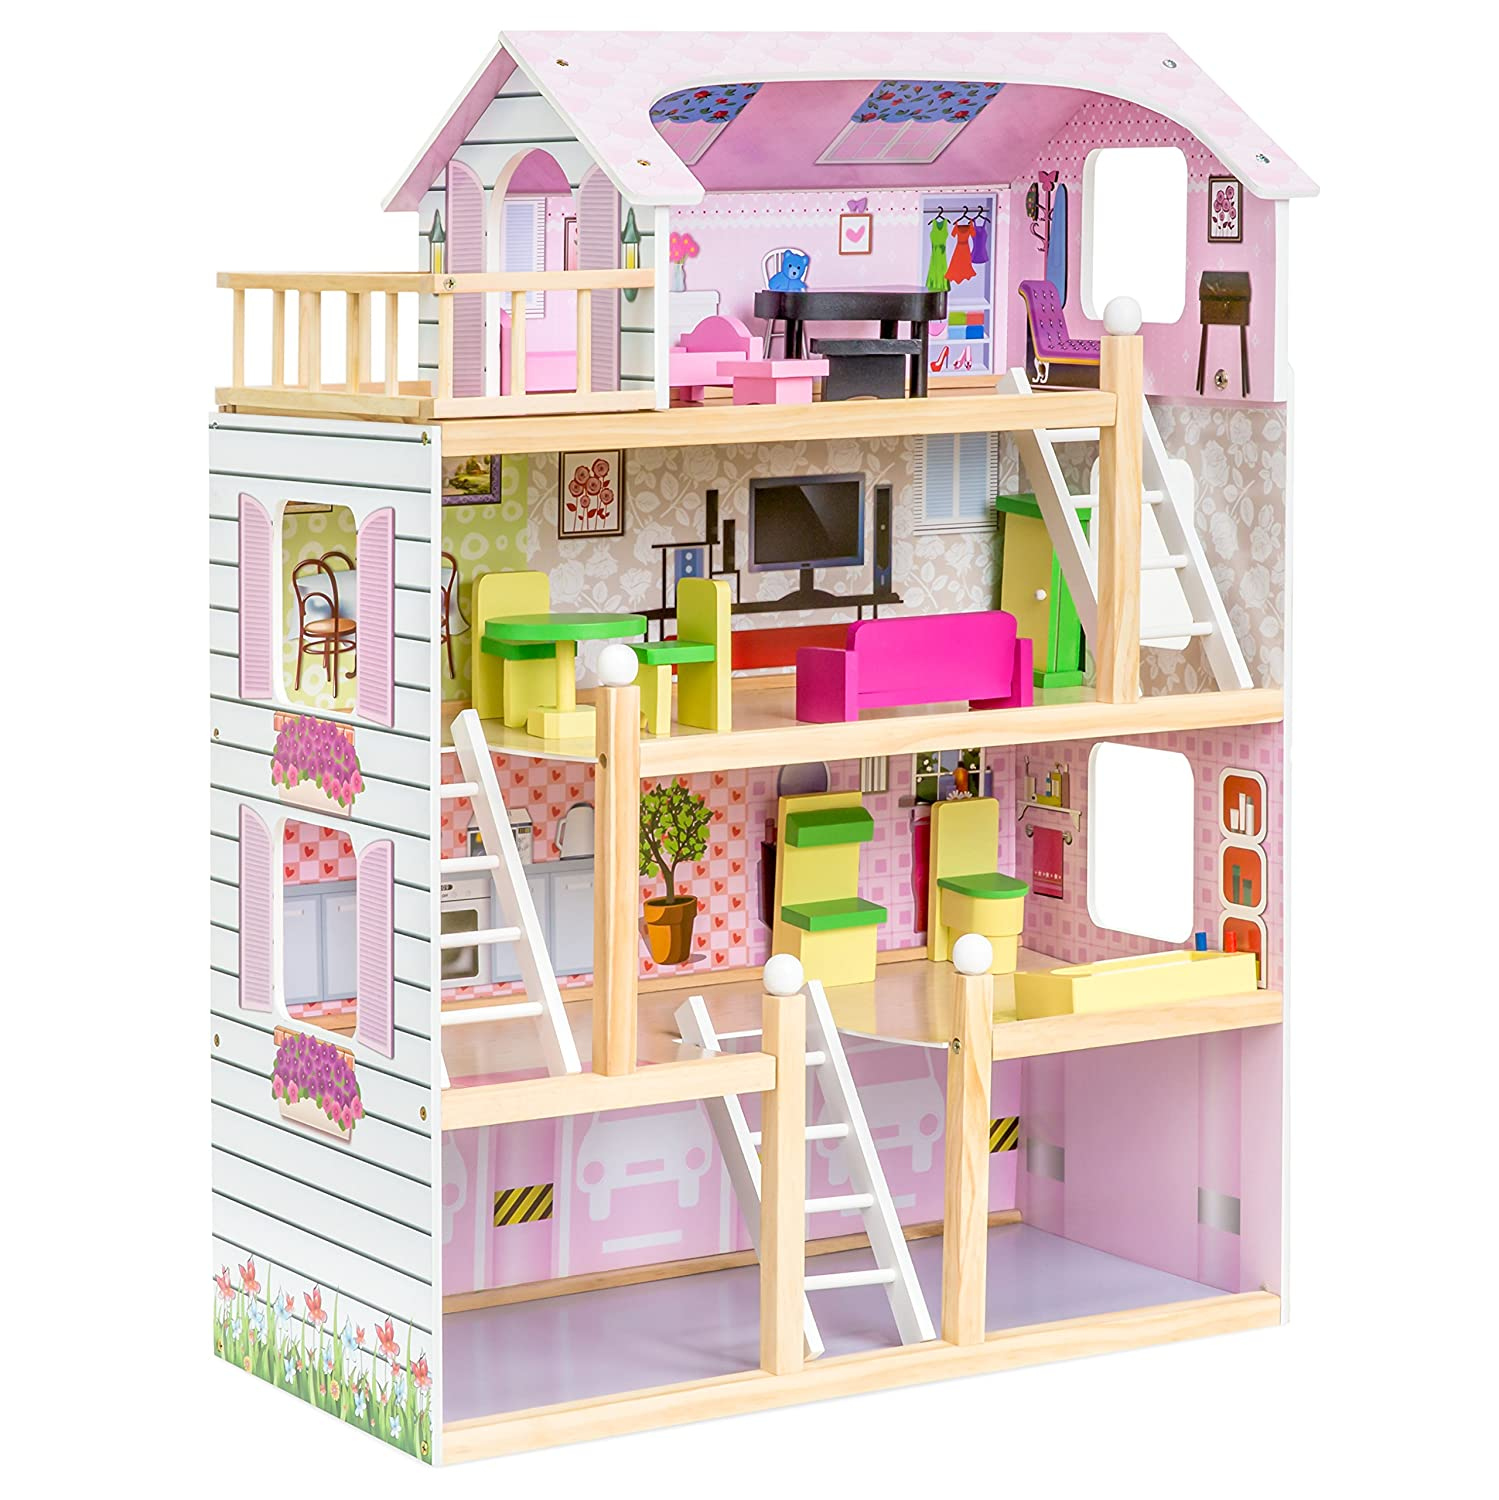 Toddler Dollhouse Accessories And Furniture Large Wooden Little Girls 